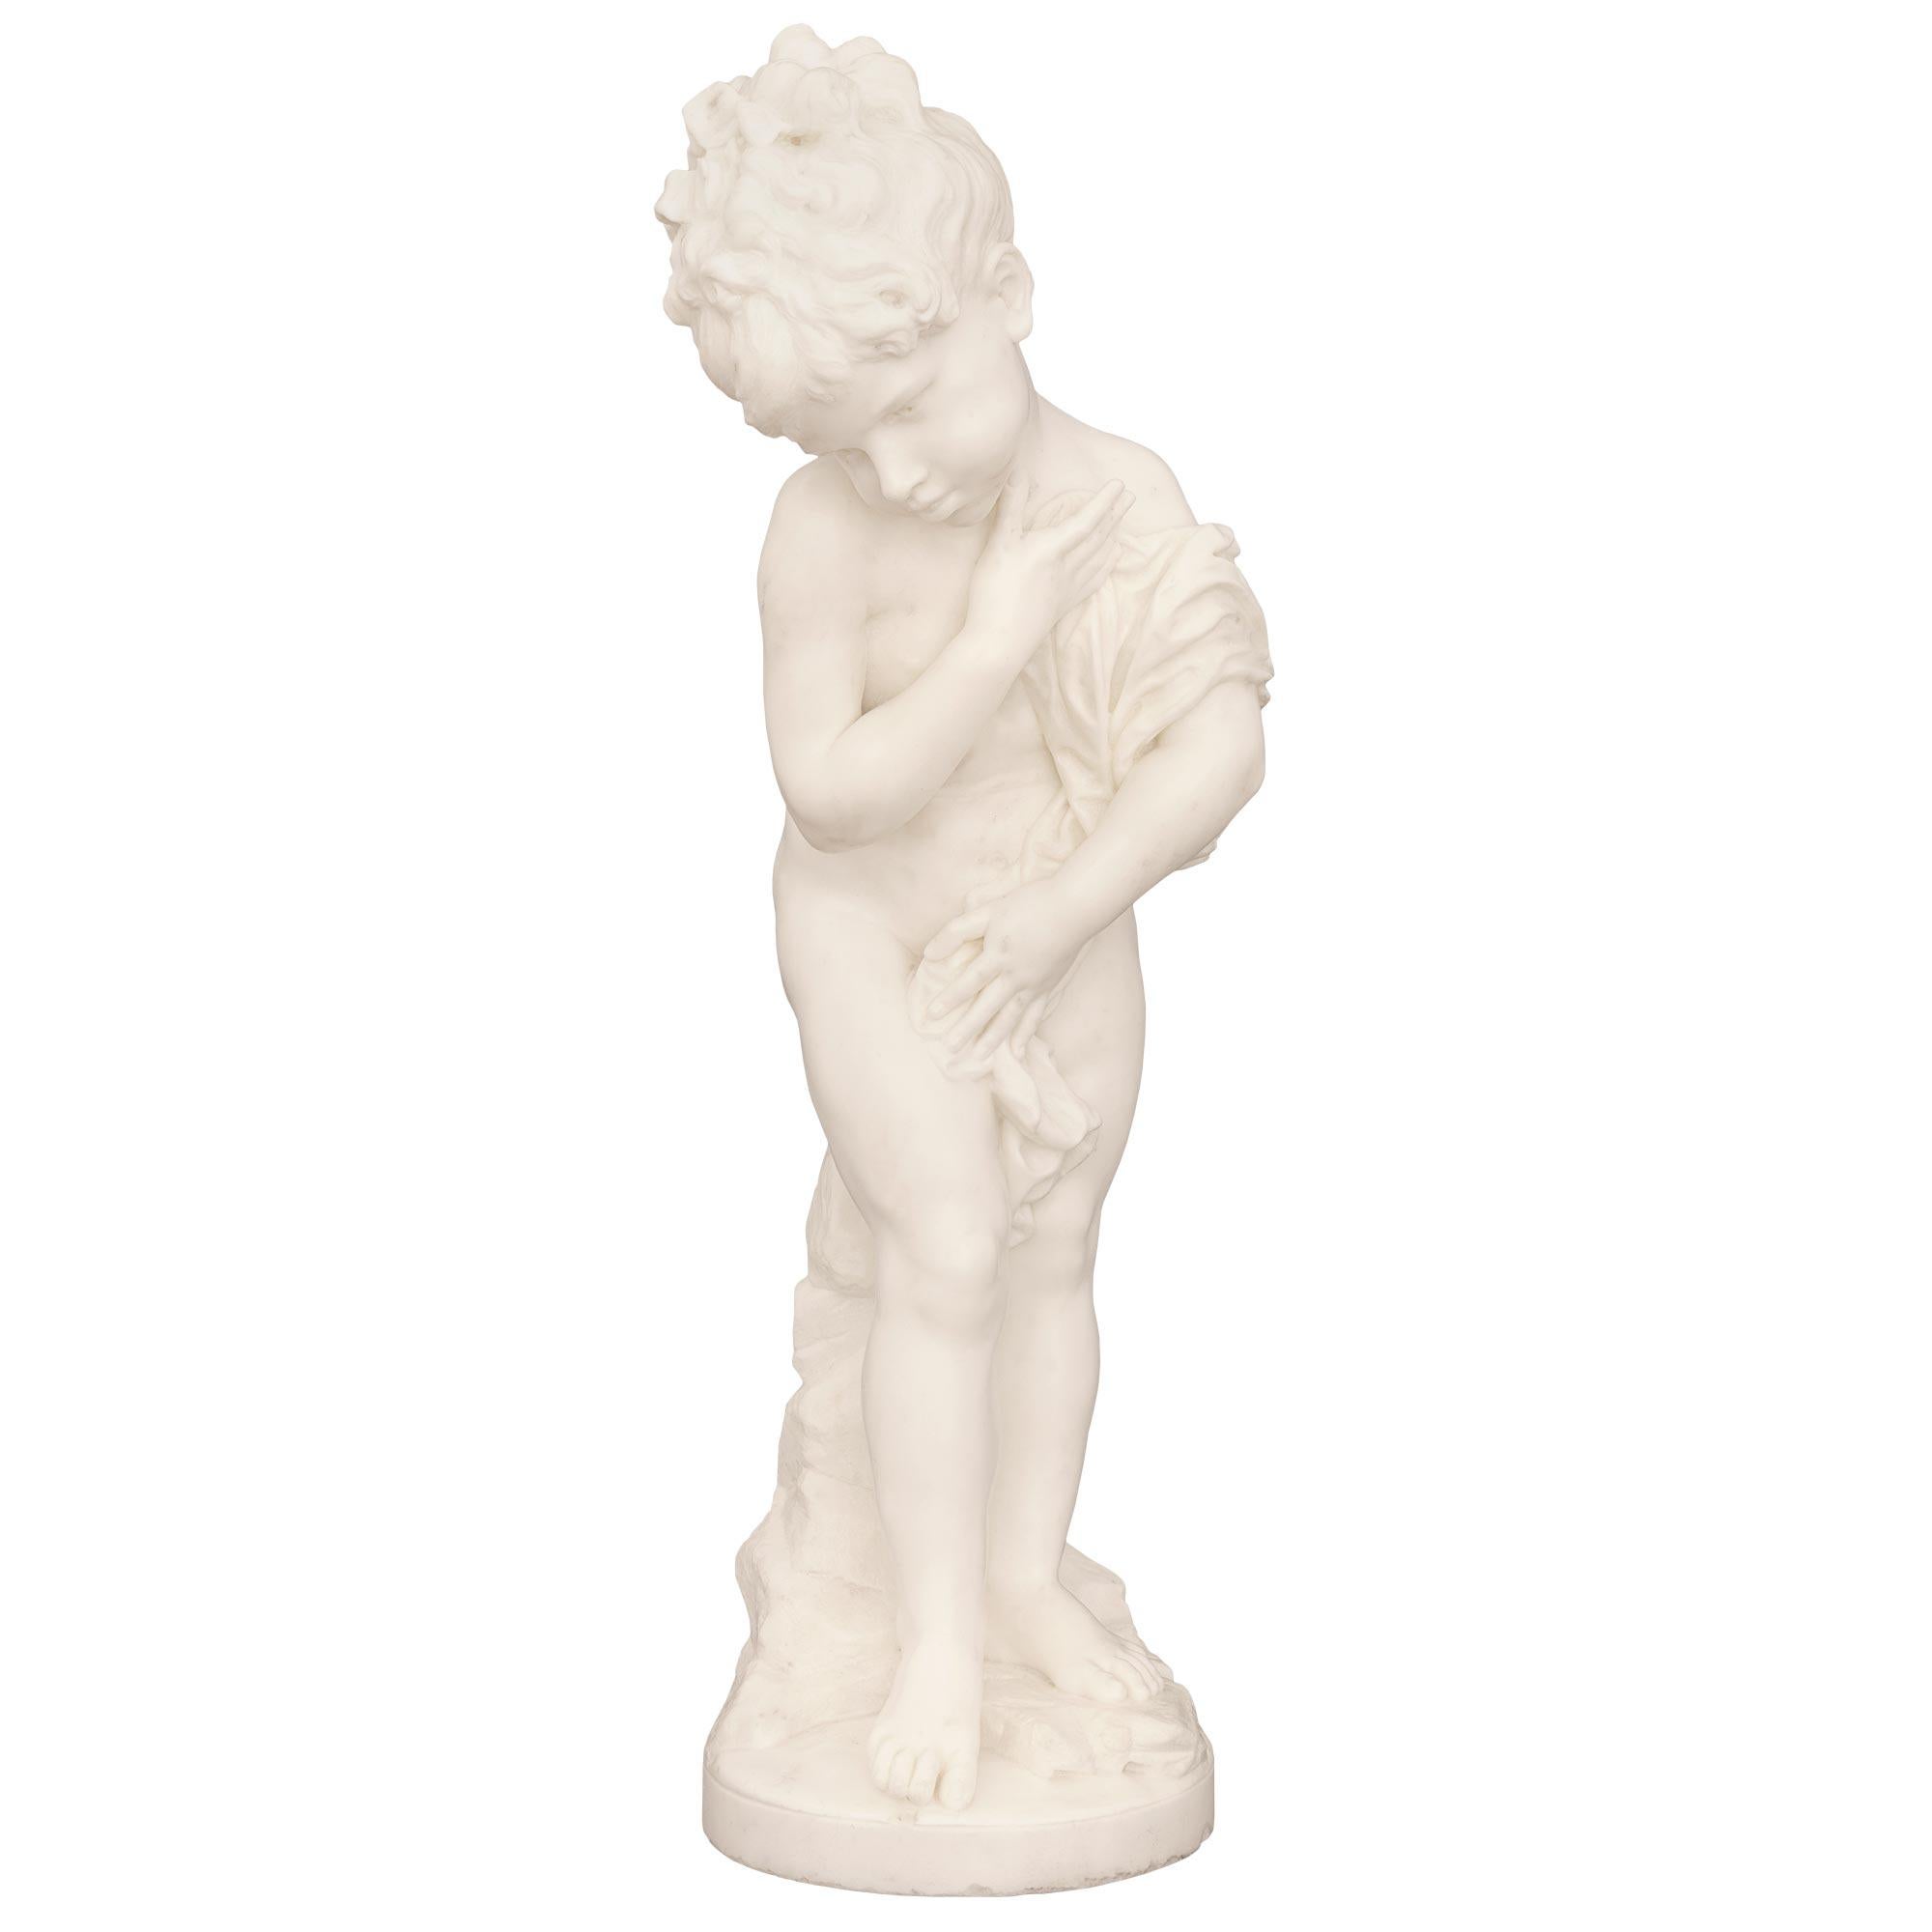 A beautiful and very high quality Italian 19th century white Carrara marble statue signed F. Mariotti Scul. The statue is raised by a circular base with exceptional ground and rock designs leading up the back. The statue depicts a beautiful young